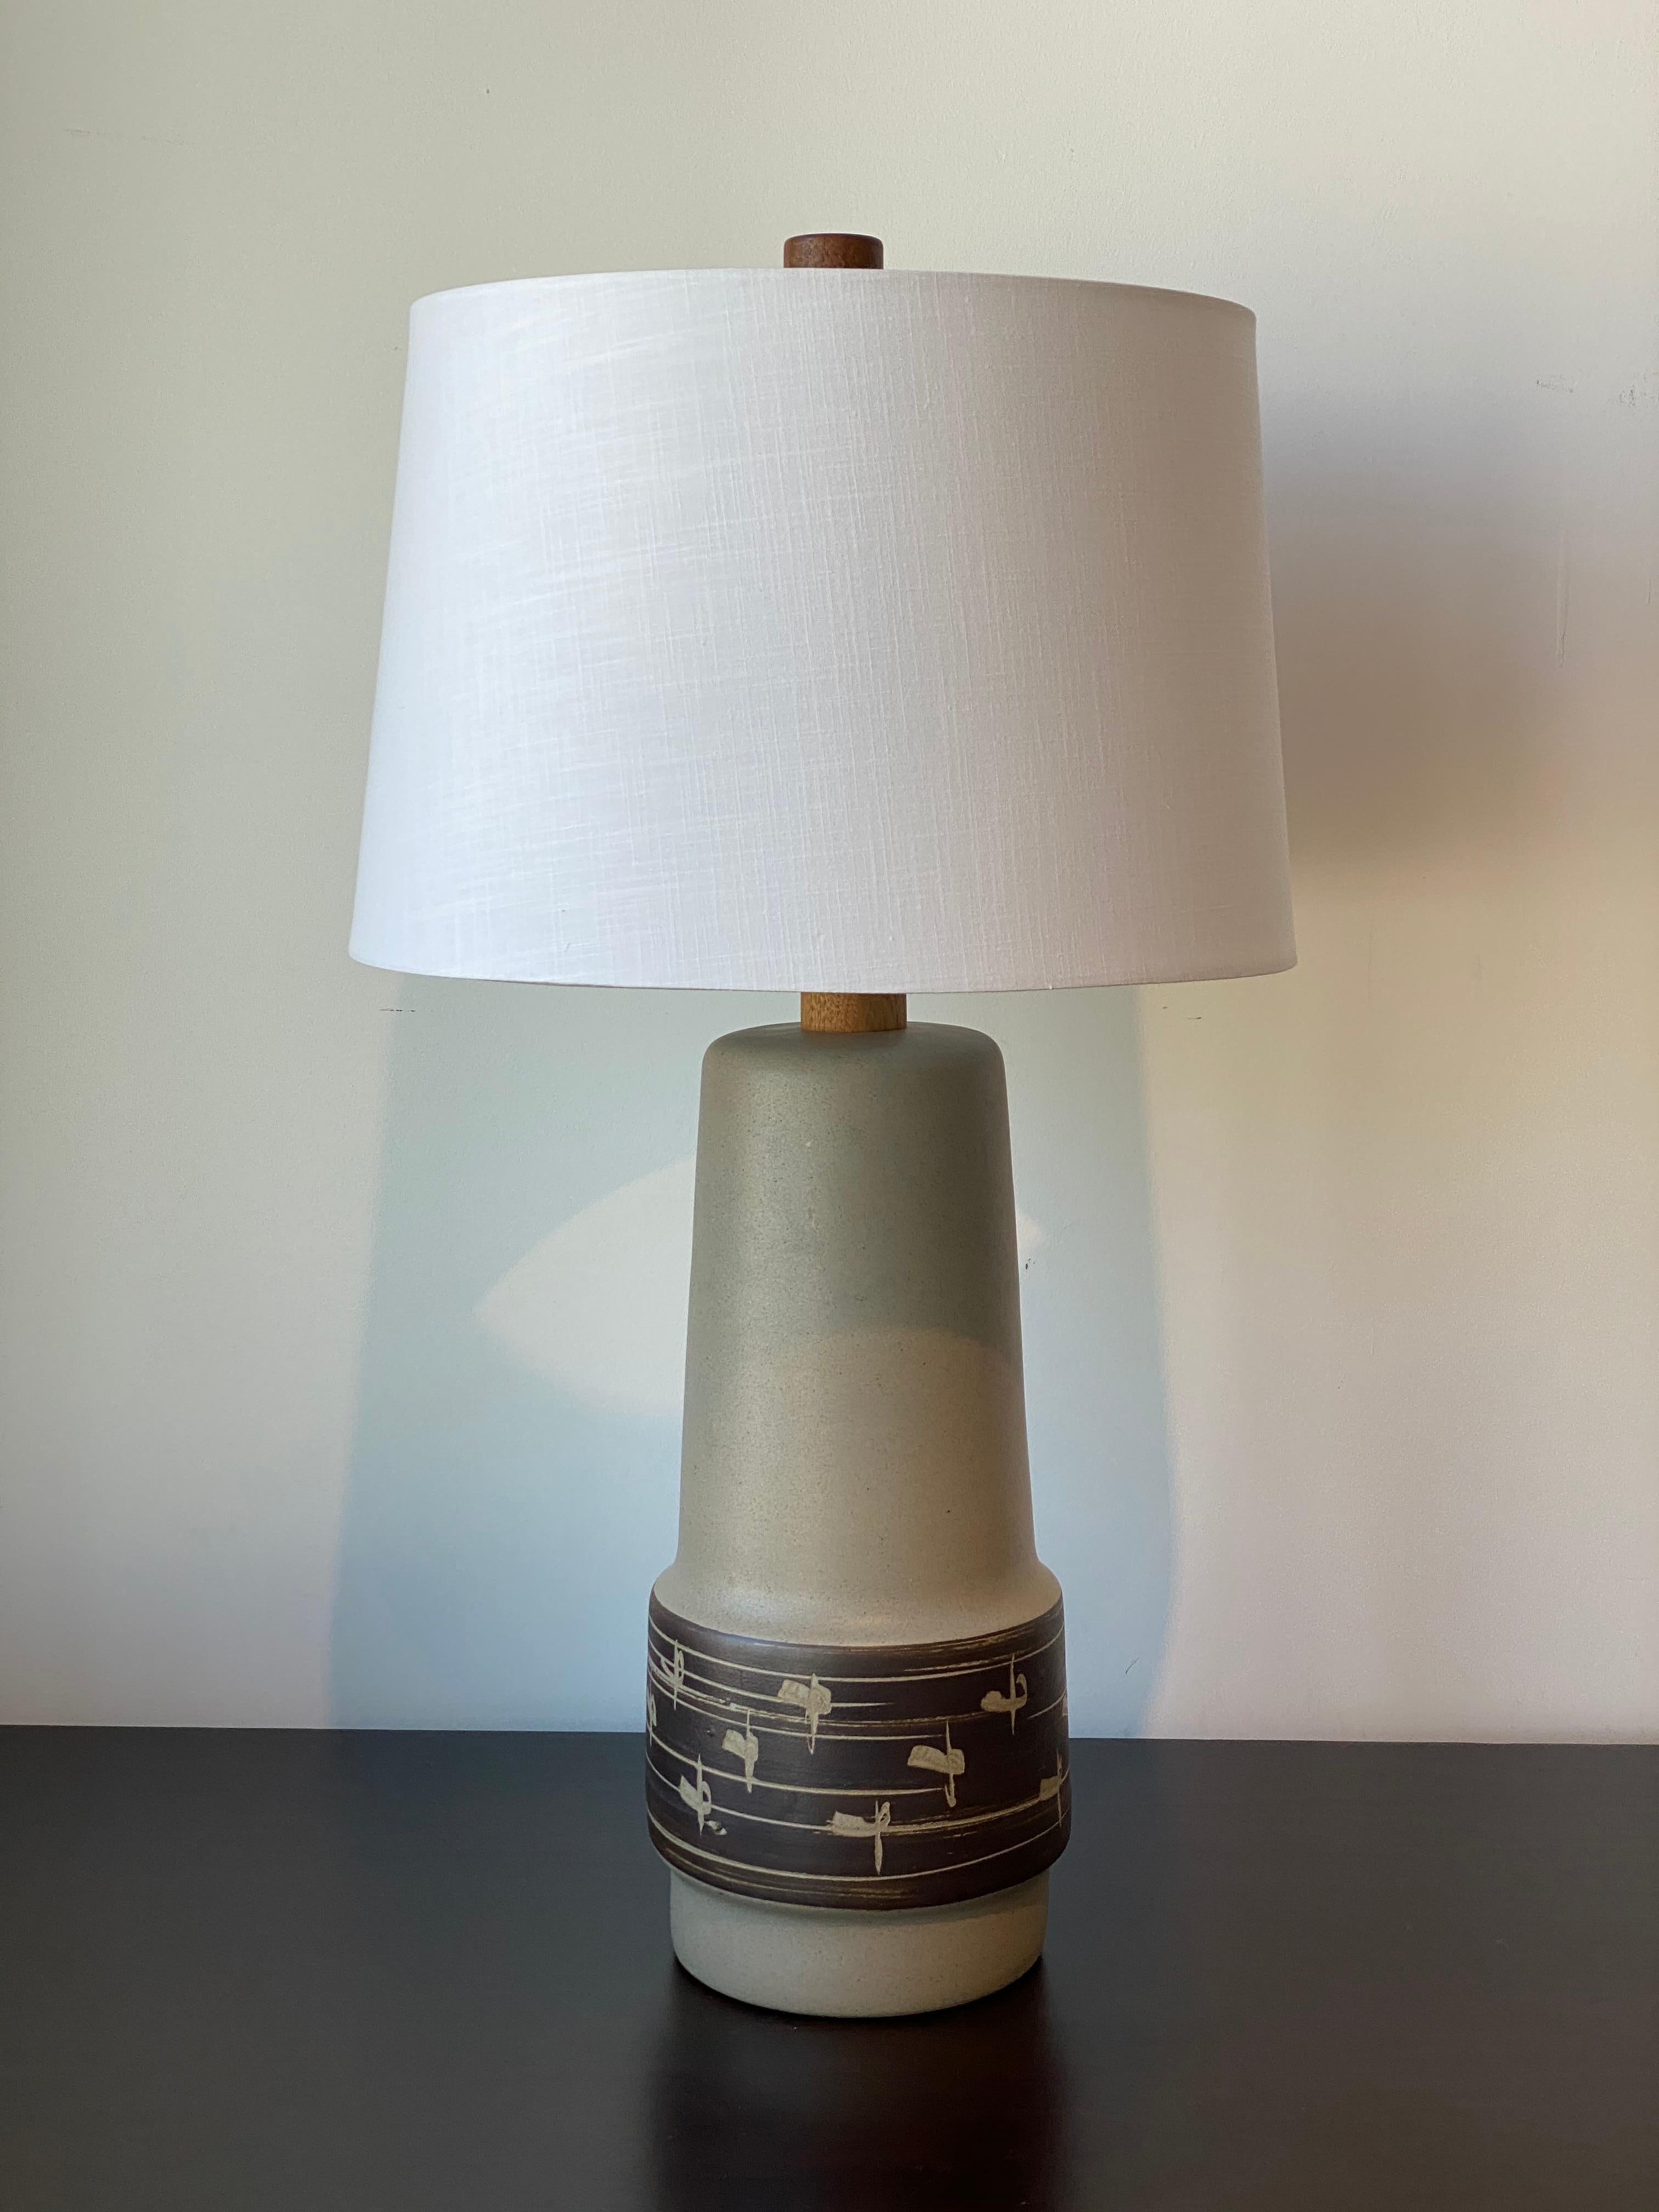 A table lamp designed by husband and wife duo Jane & Gordon Martz. Produced by Marshall Studios, Indianapolis. 

Bases are slip-cast and then dipped into glaze and hand painted. Design also incorporates exquisite walnut necks and finials. Bases are